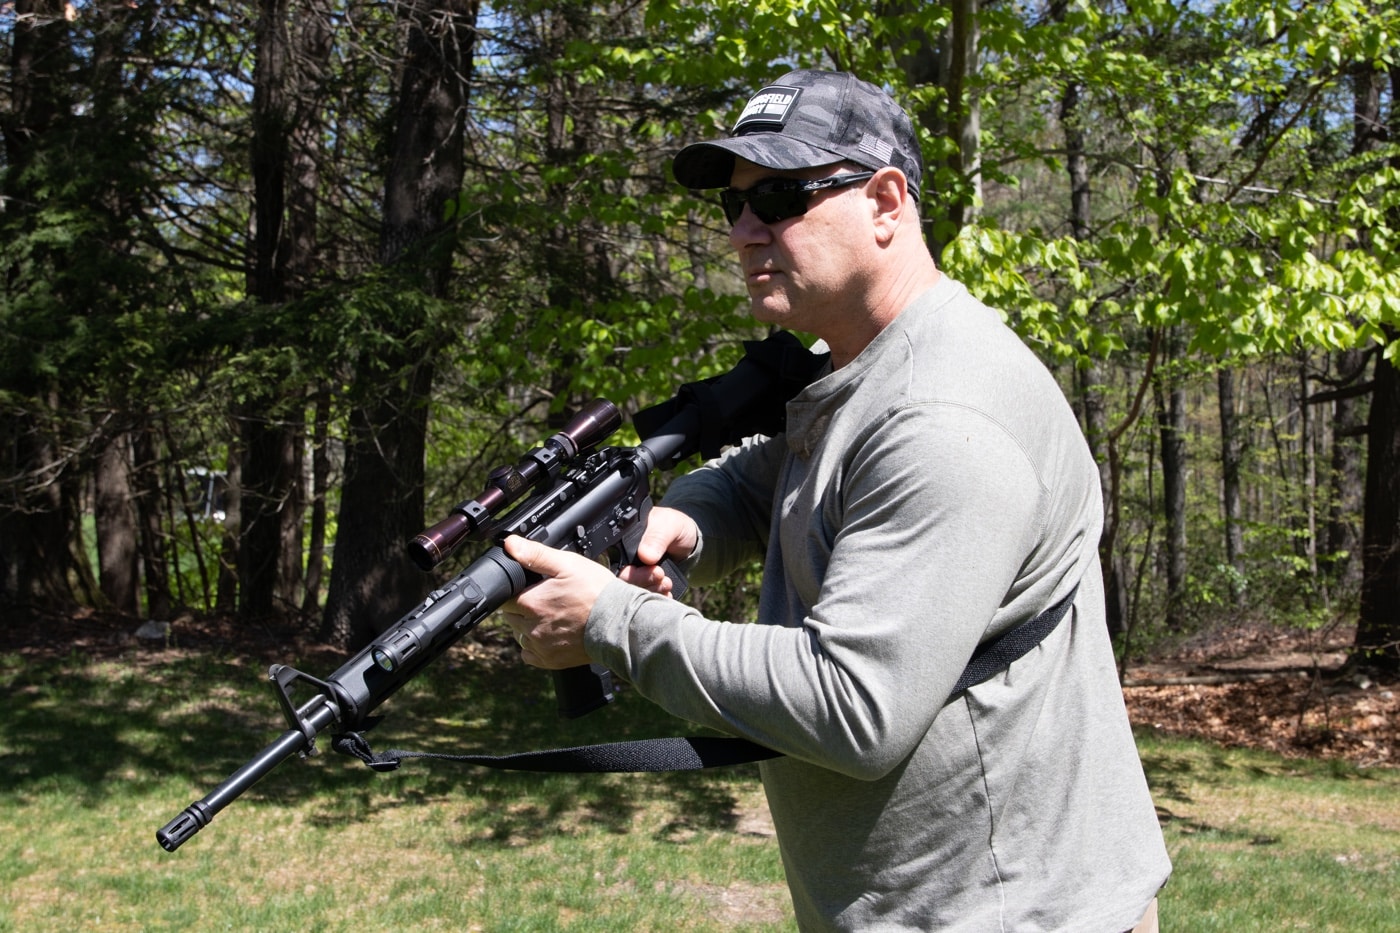 author evaluating the reliability of the saint b5 m-lok